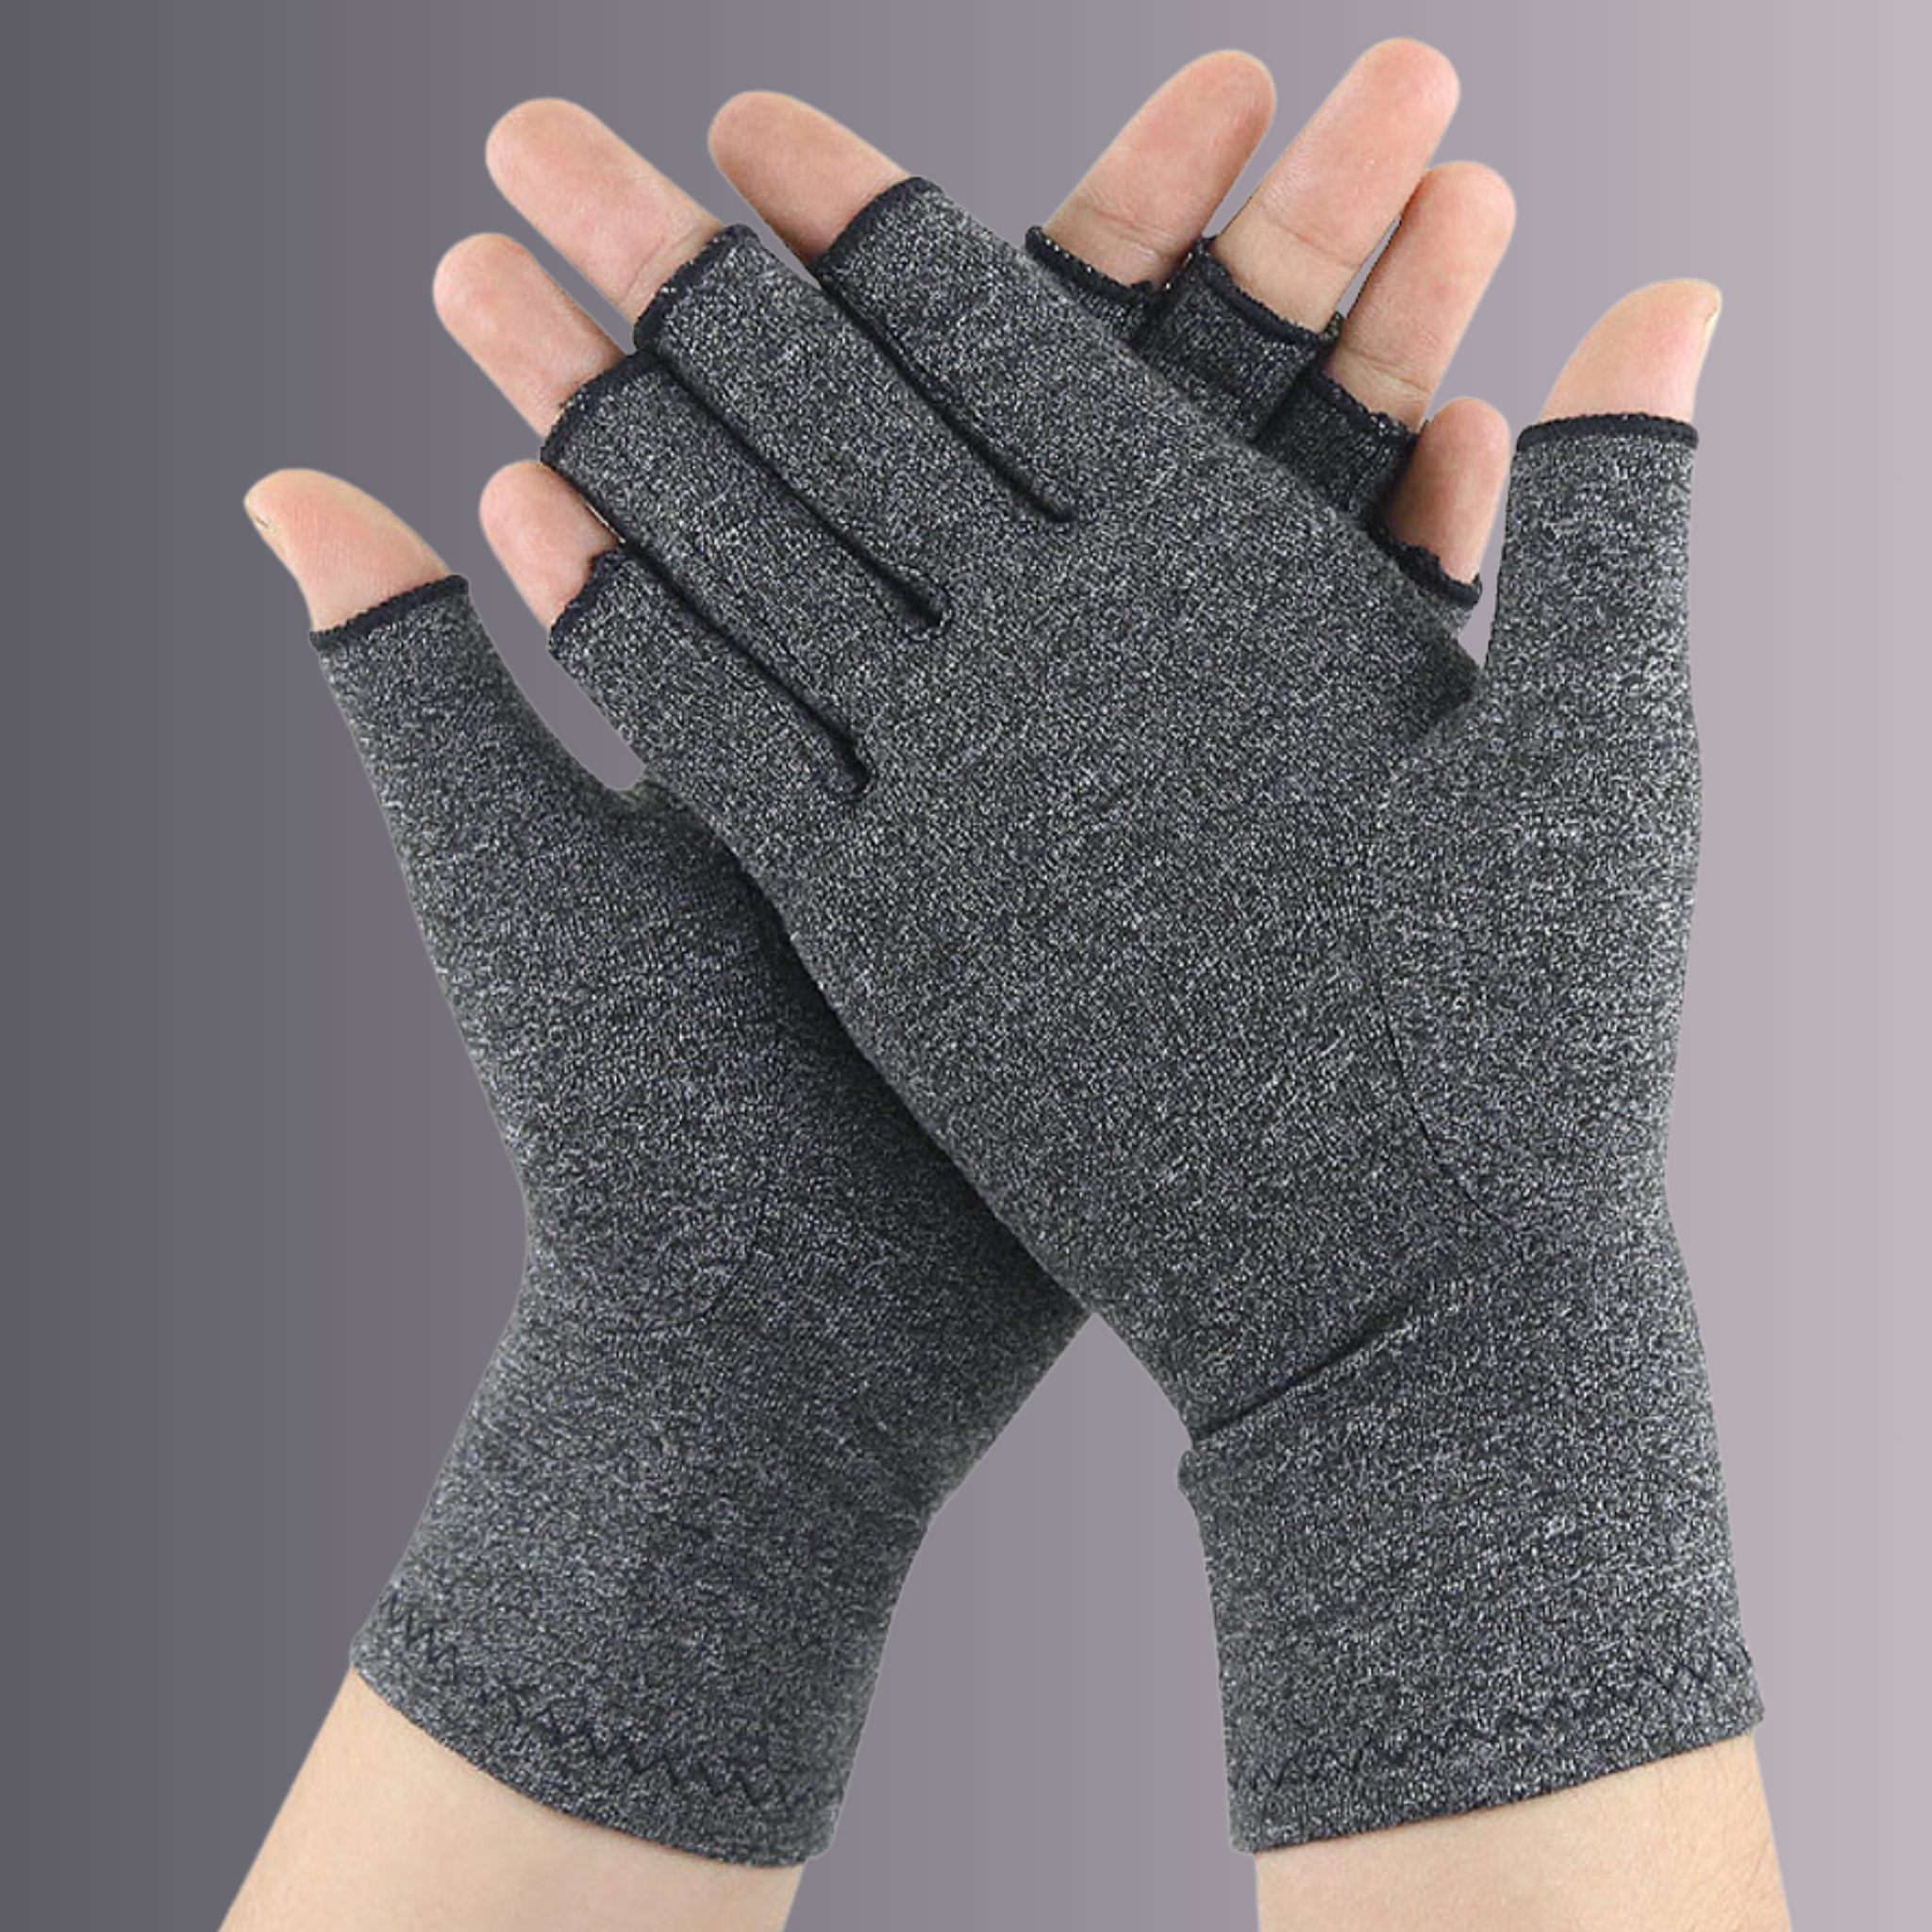 magnetic therapy gloves